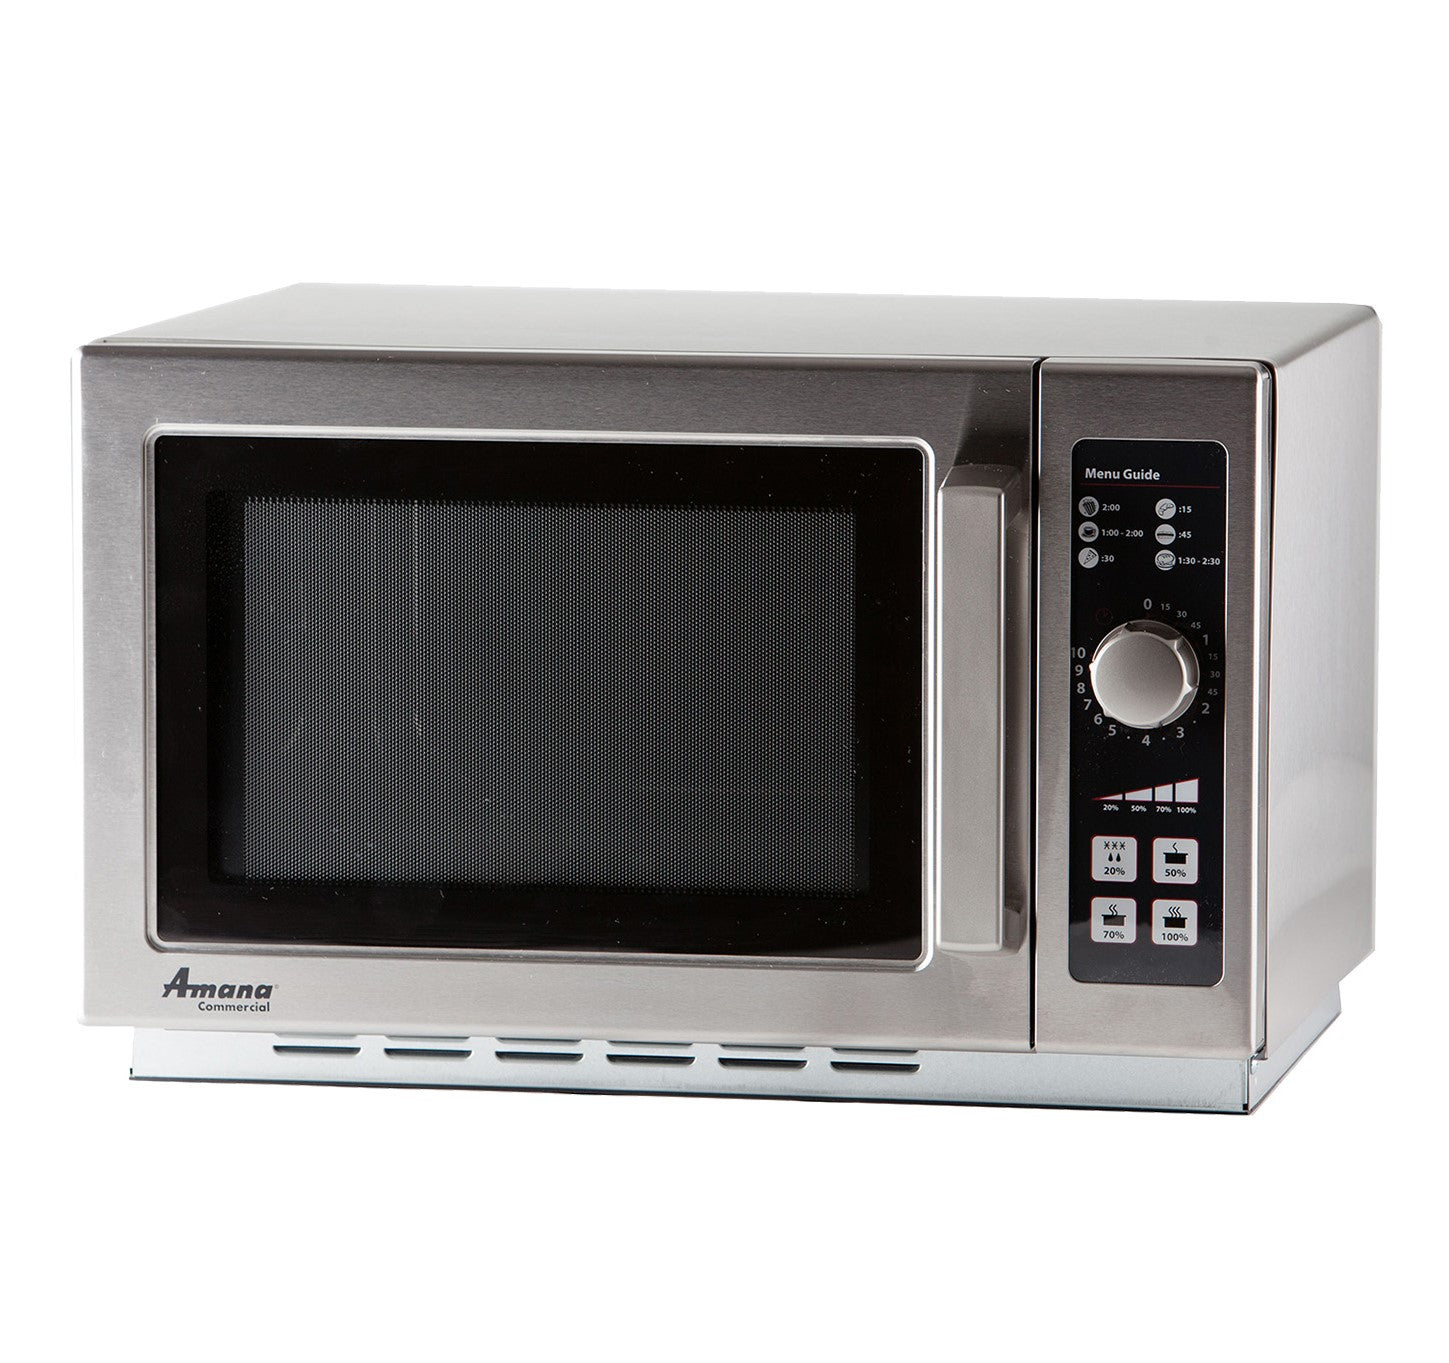 Amana Commercial Microwave Oven- Braille